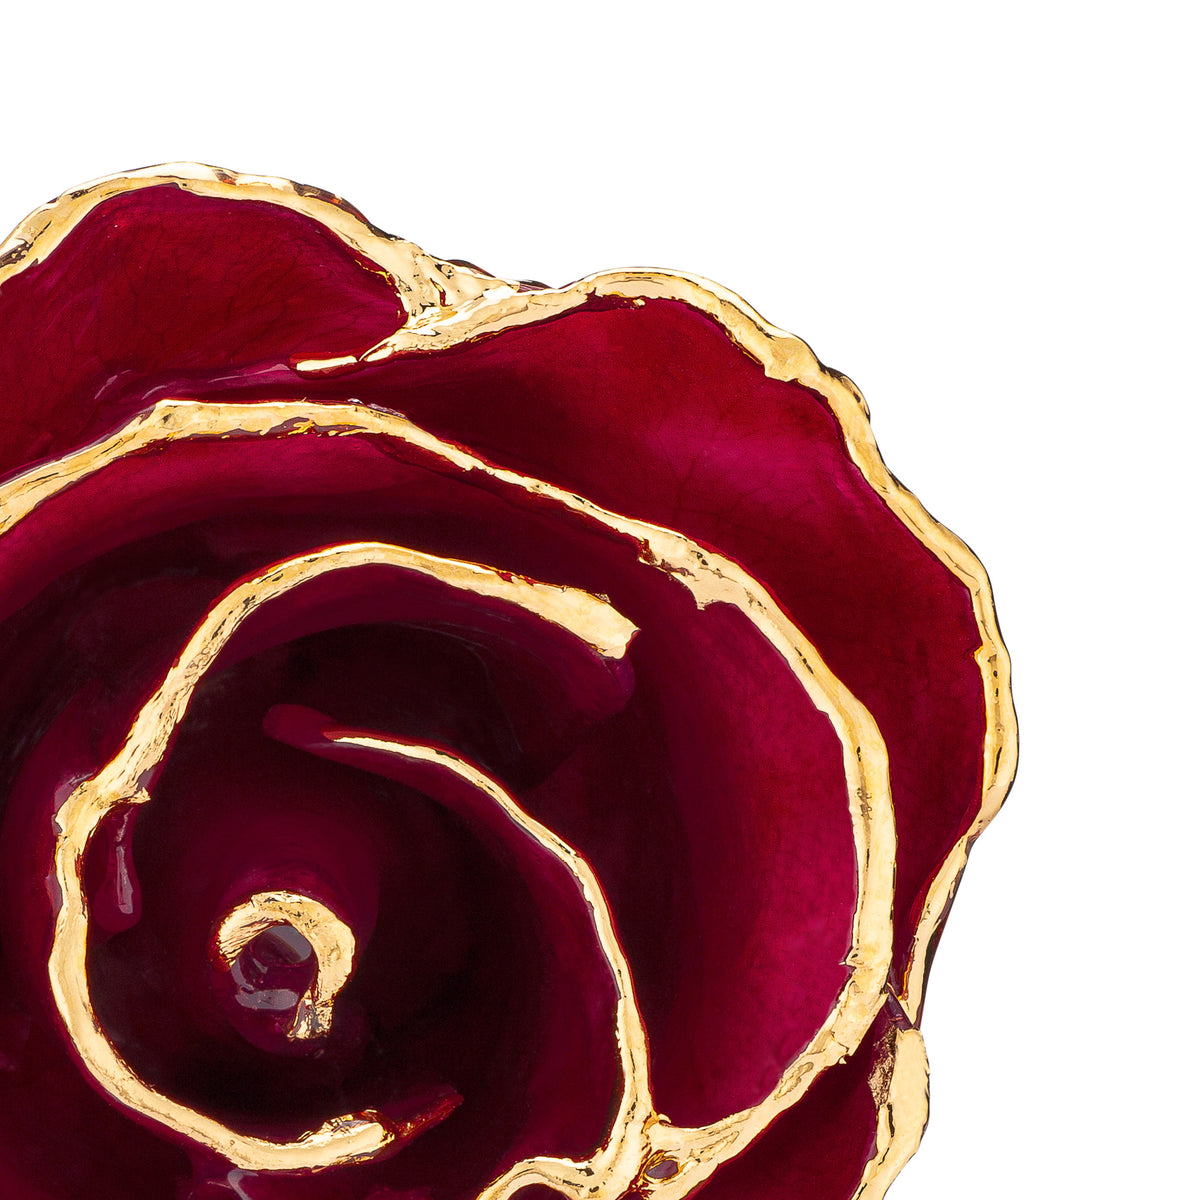 24K Gold Trimmed Forever Rose with Deep Red Burgundy Petals with View of Stem, Leaves, and Rose Petals and Showing Detail of Gold Trim Top Zoom View